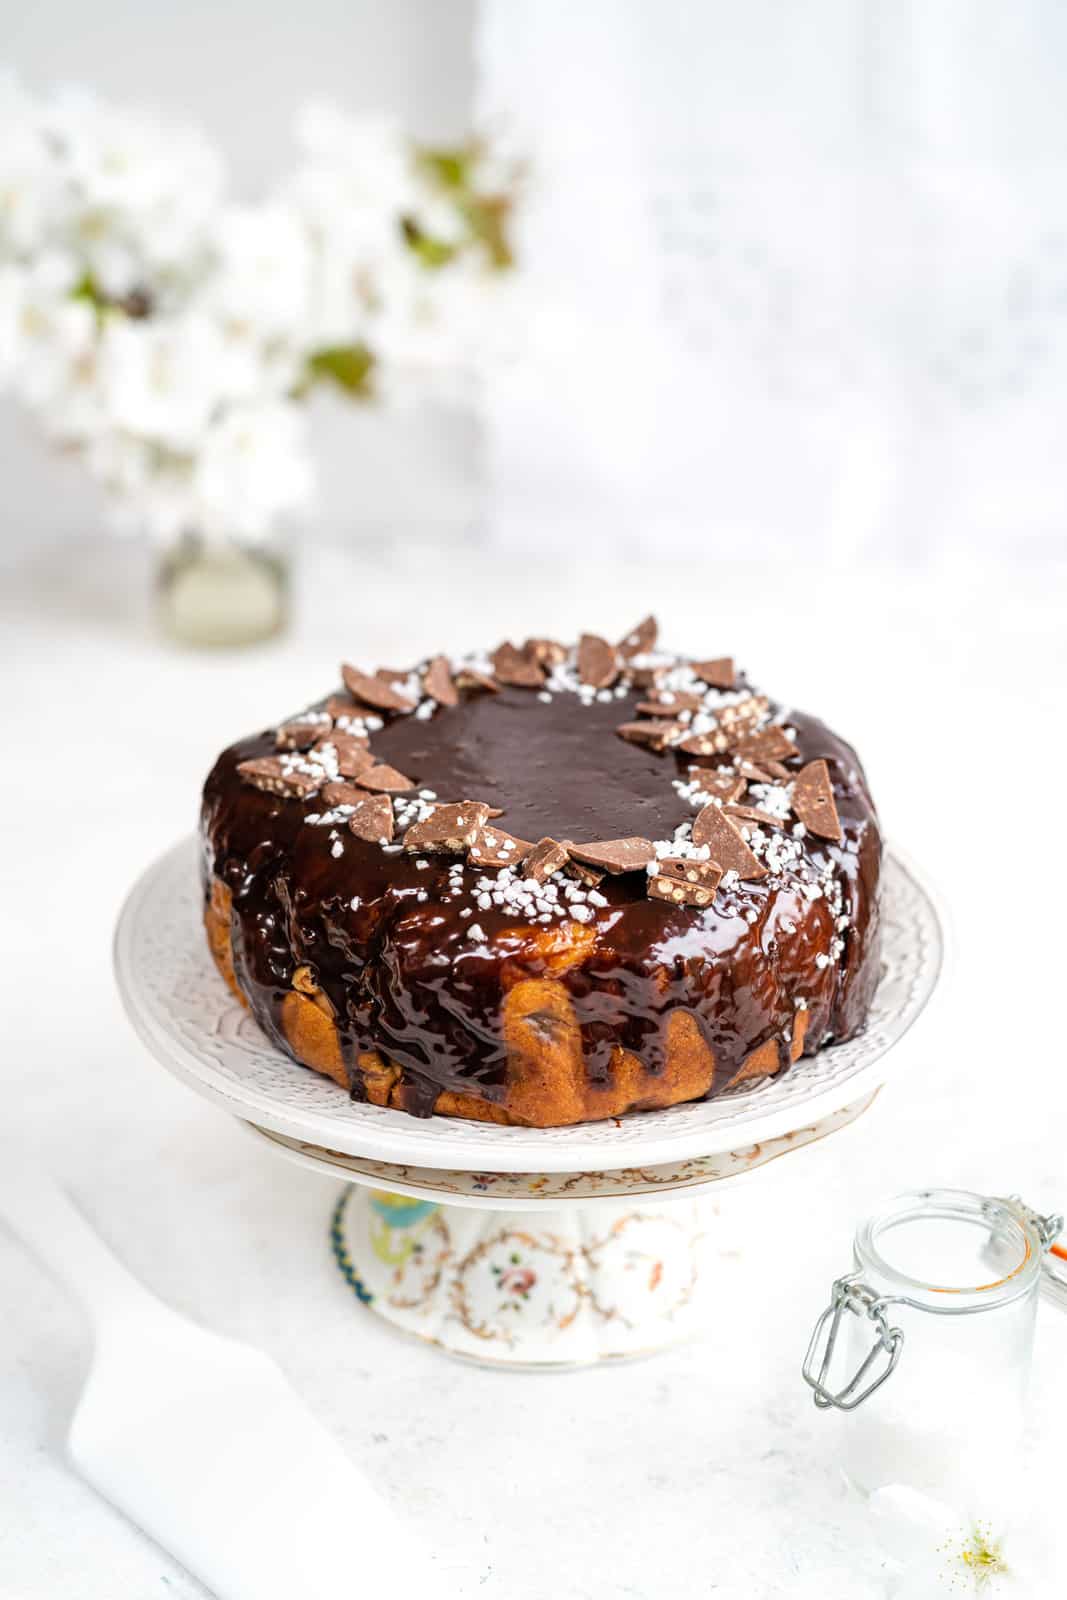 Slow cooker banana bread covered with chocolate glaze and chocolate buttons on a cake stand